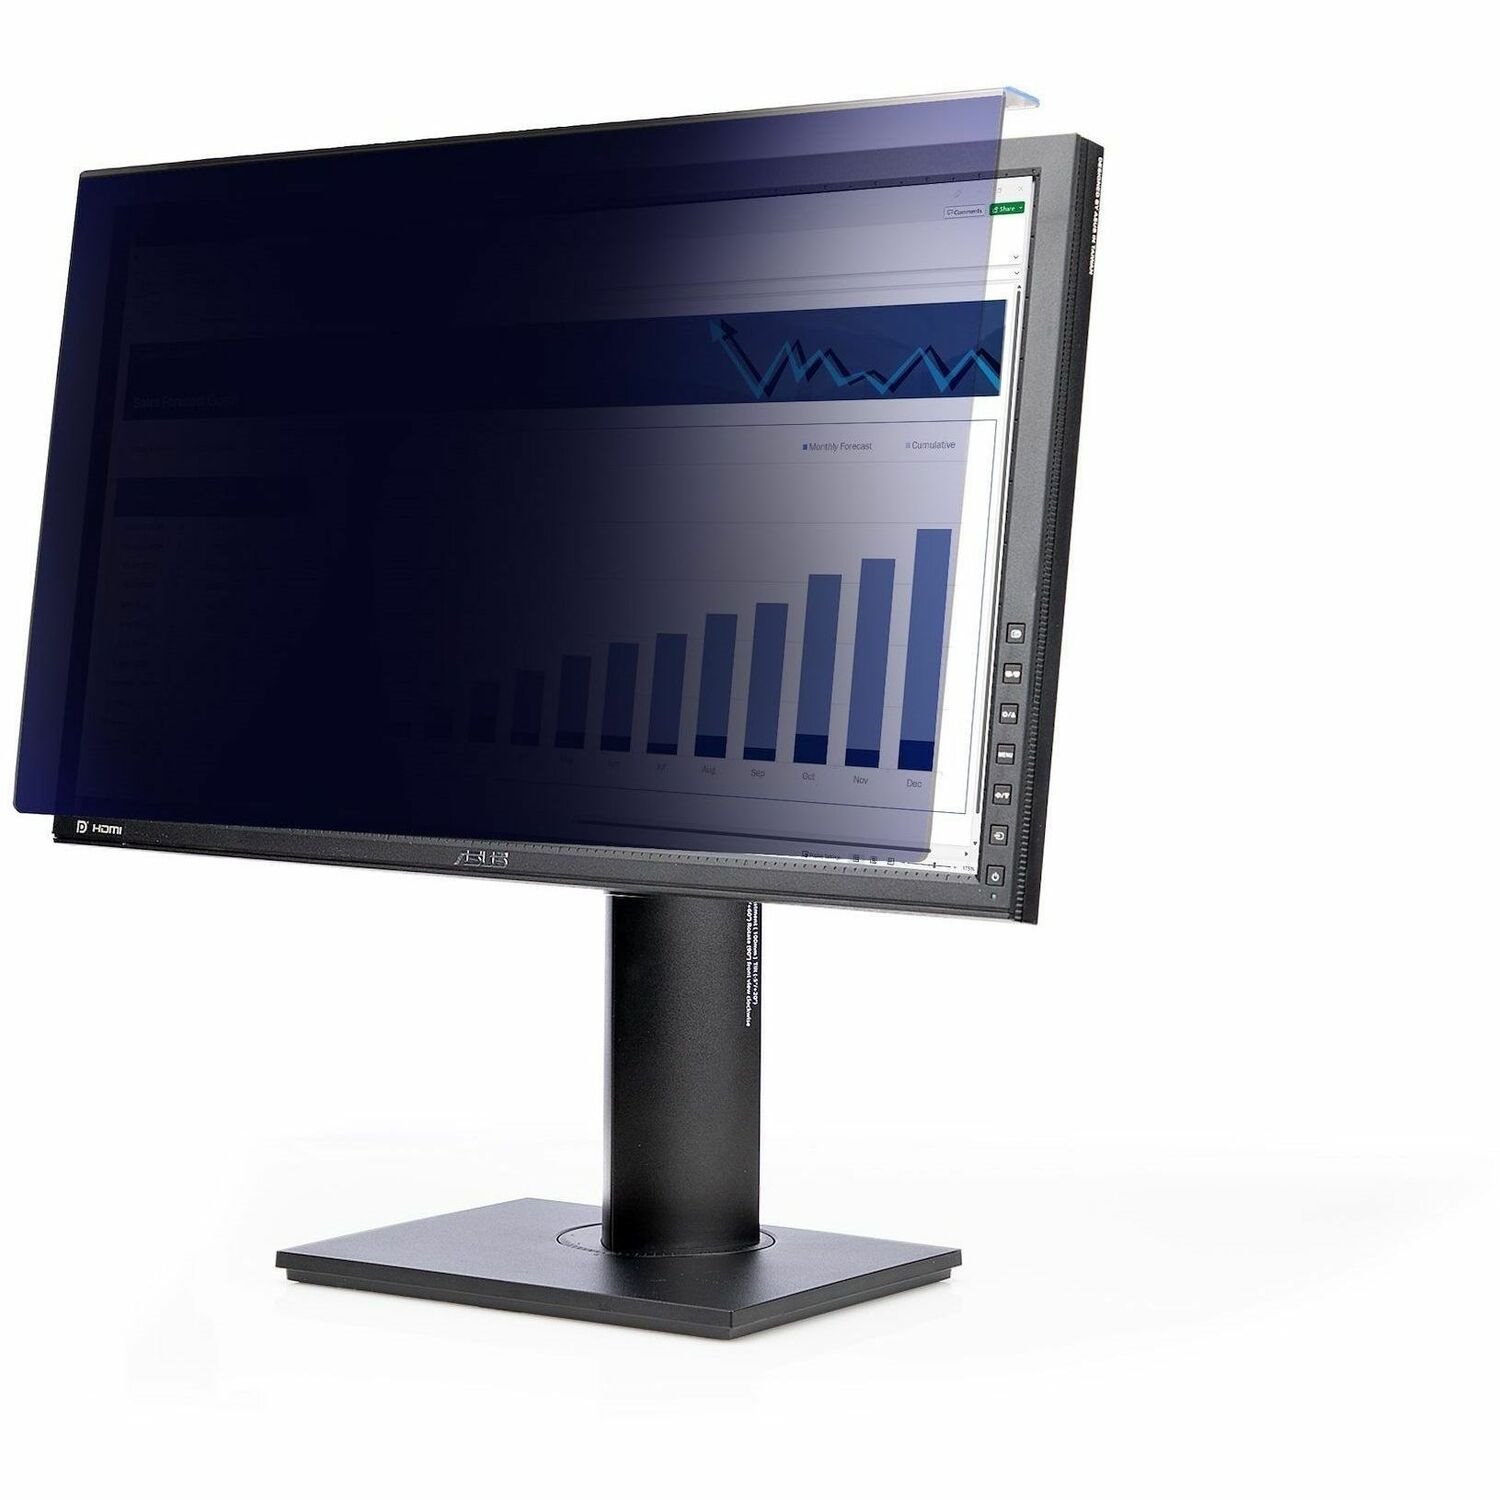 StarTech.com 24-inch 16:9 Computer Monitor Privacy Screen, Hanging Acrylic Filter, Monitor Screen Protector/Shield, +/- 30 Deg., Glossy